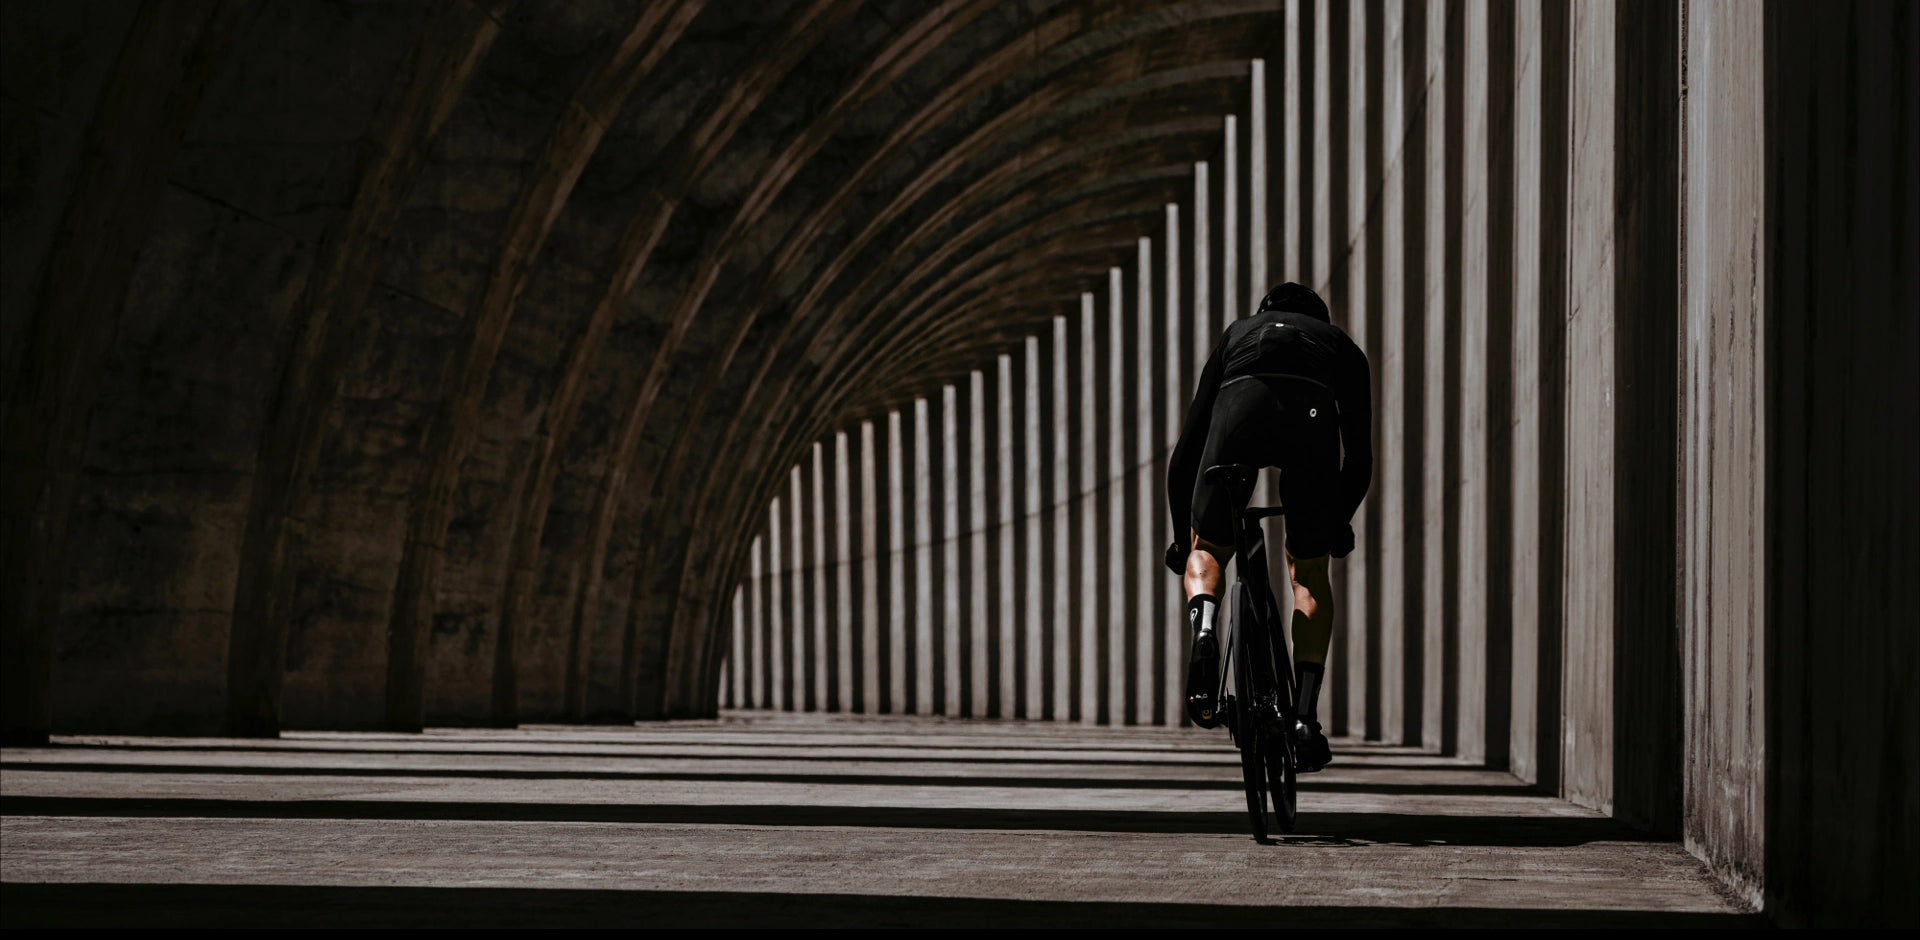 Lone cyclist in silhouette riding through an architectural corridor, embodying the essence of road biking @ Bici.